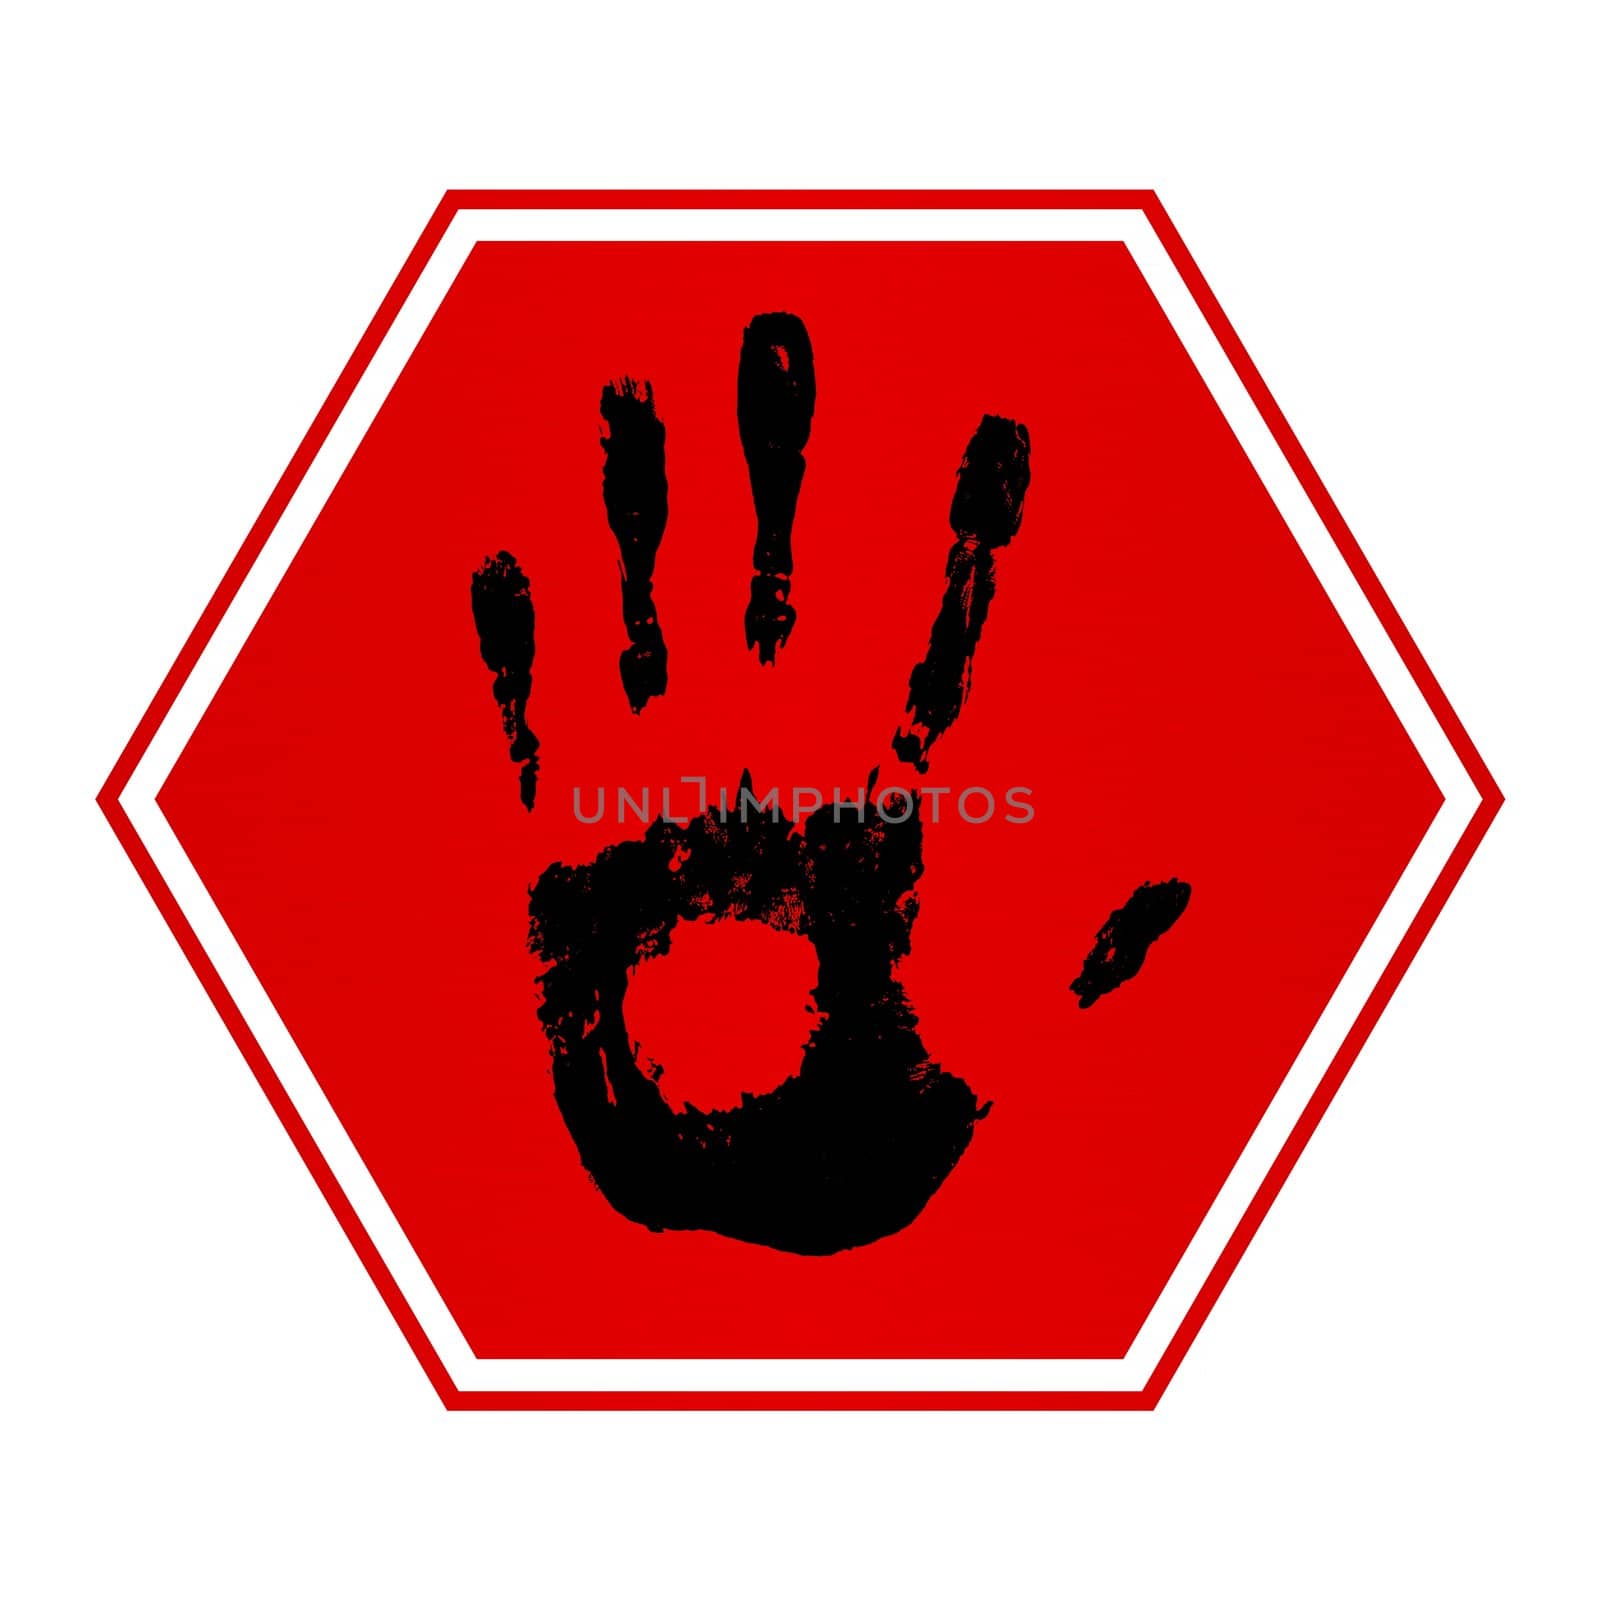 Illustration of a stop hand sign